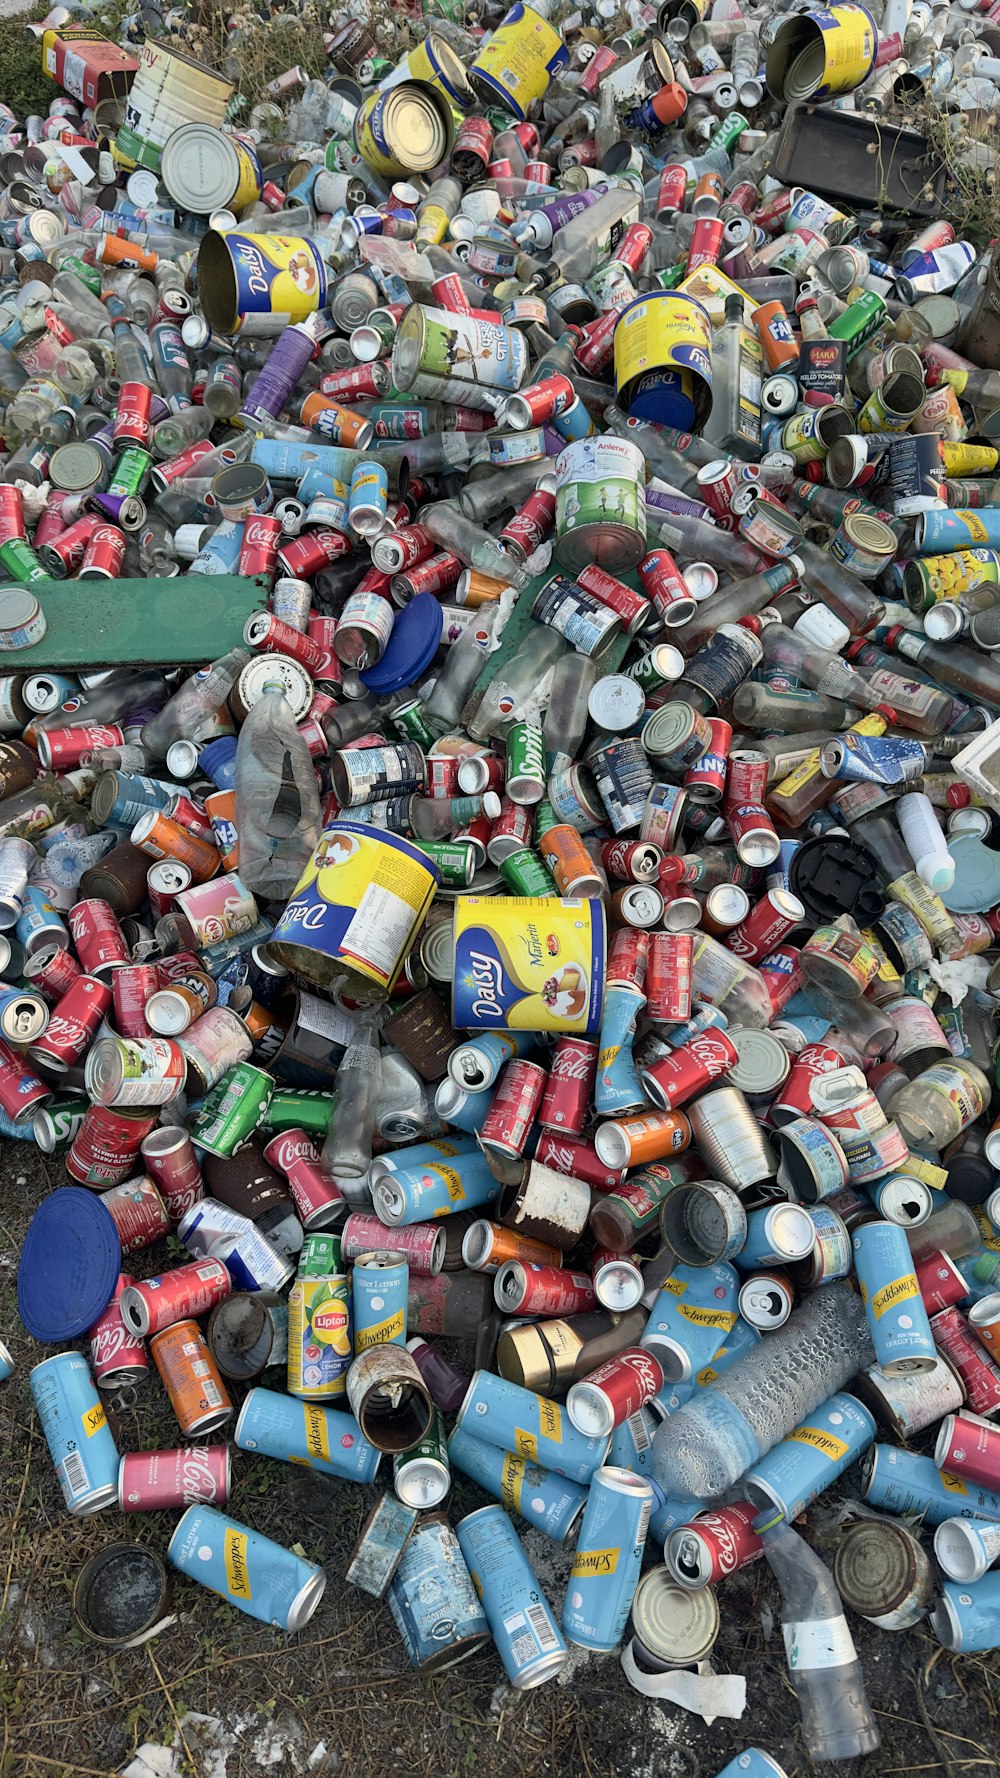 a pile of cans and cans of various sizes and colors